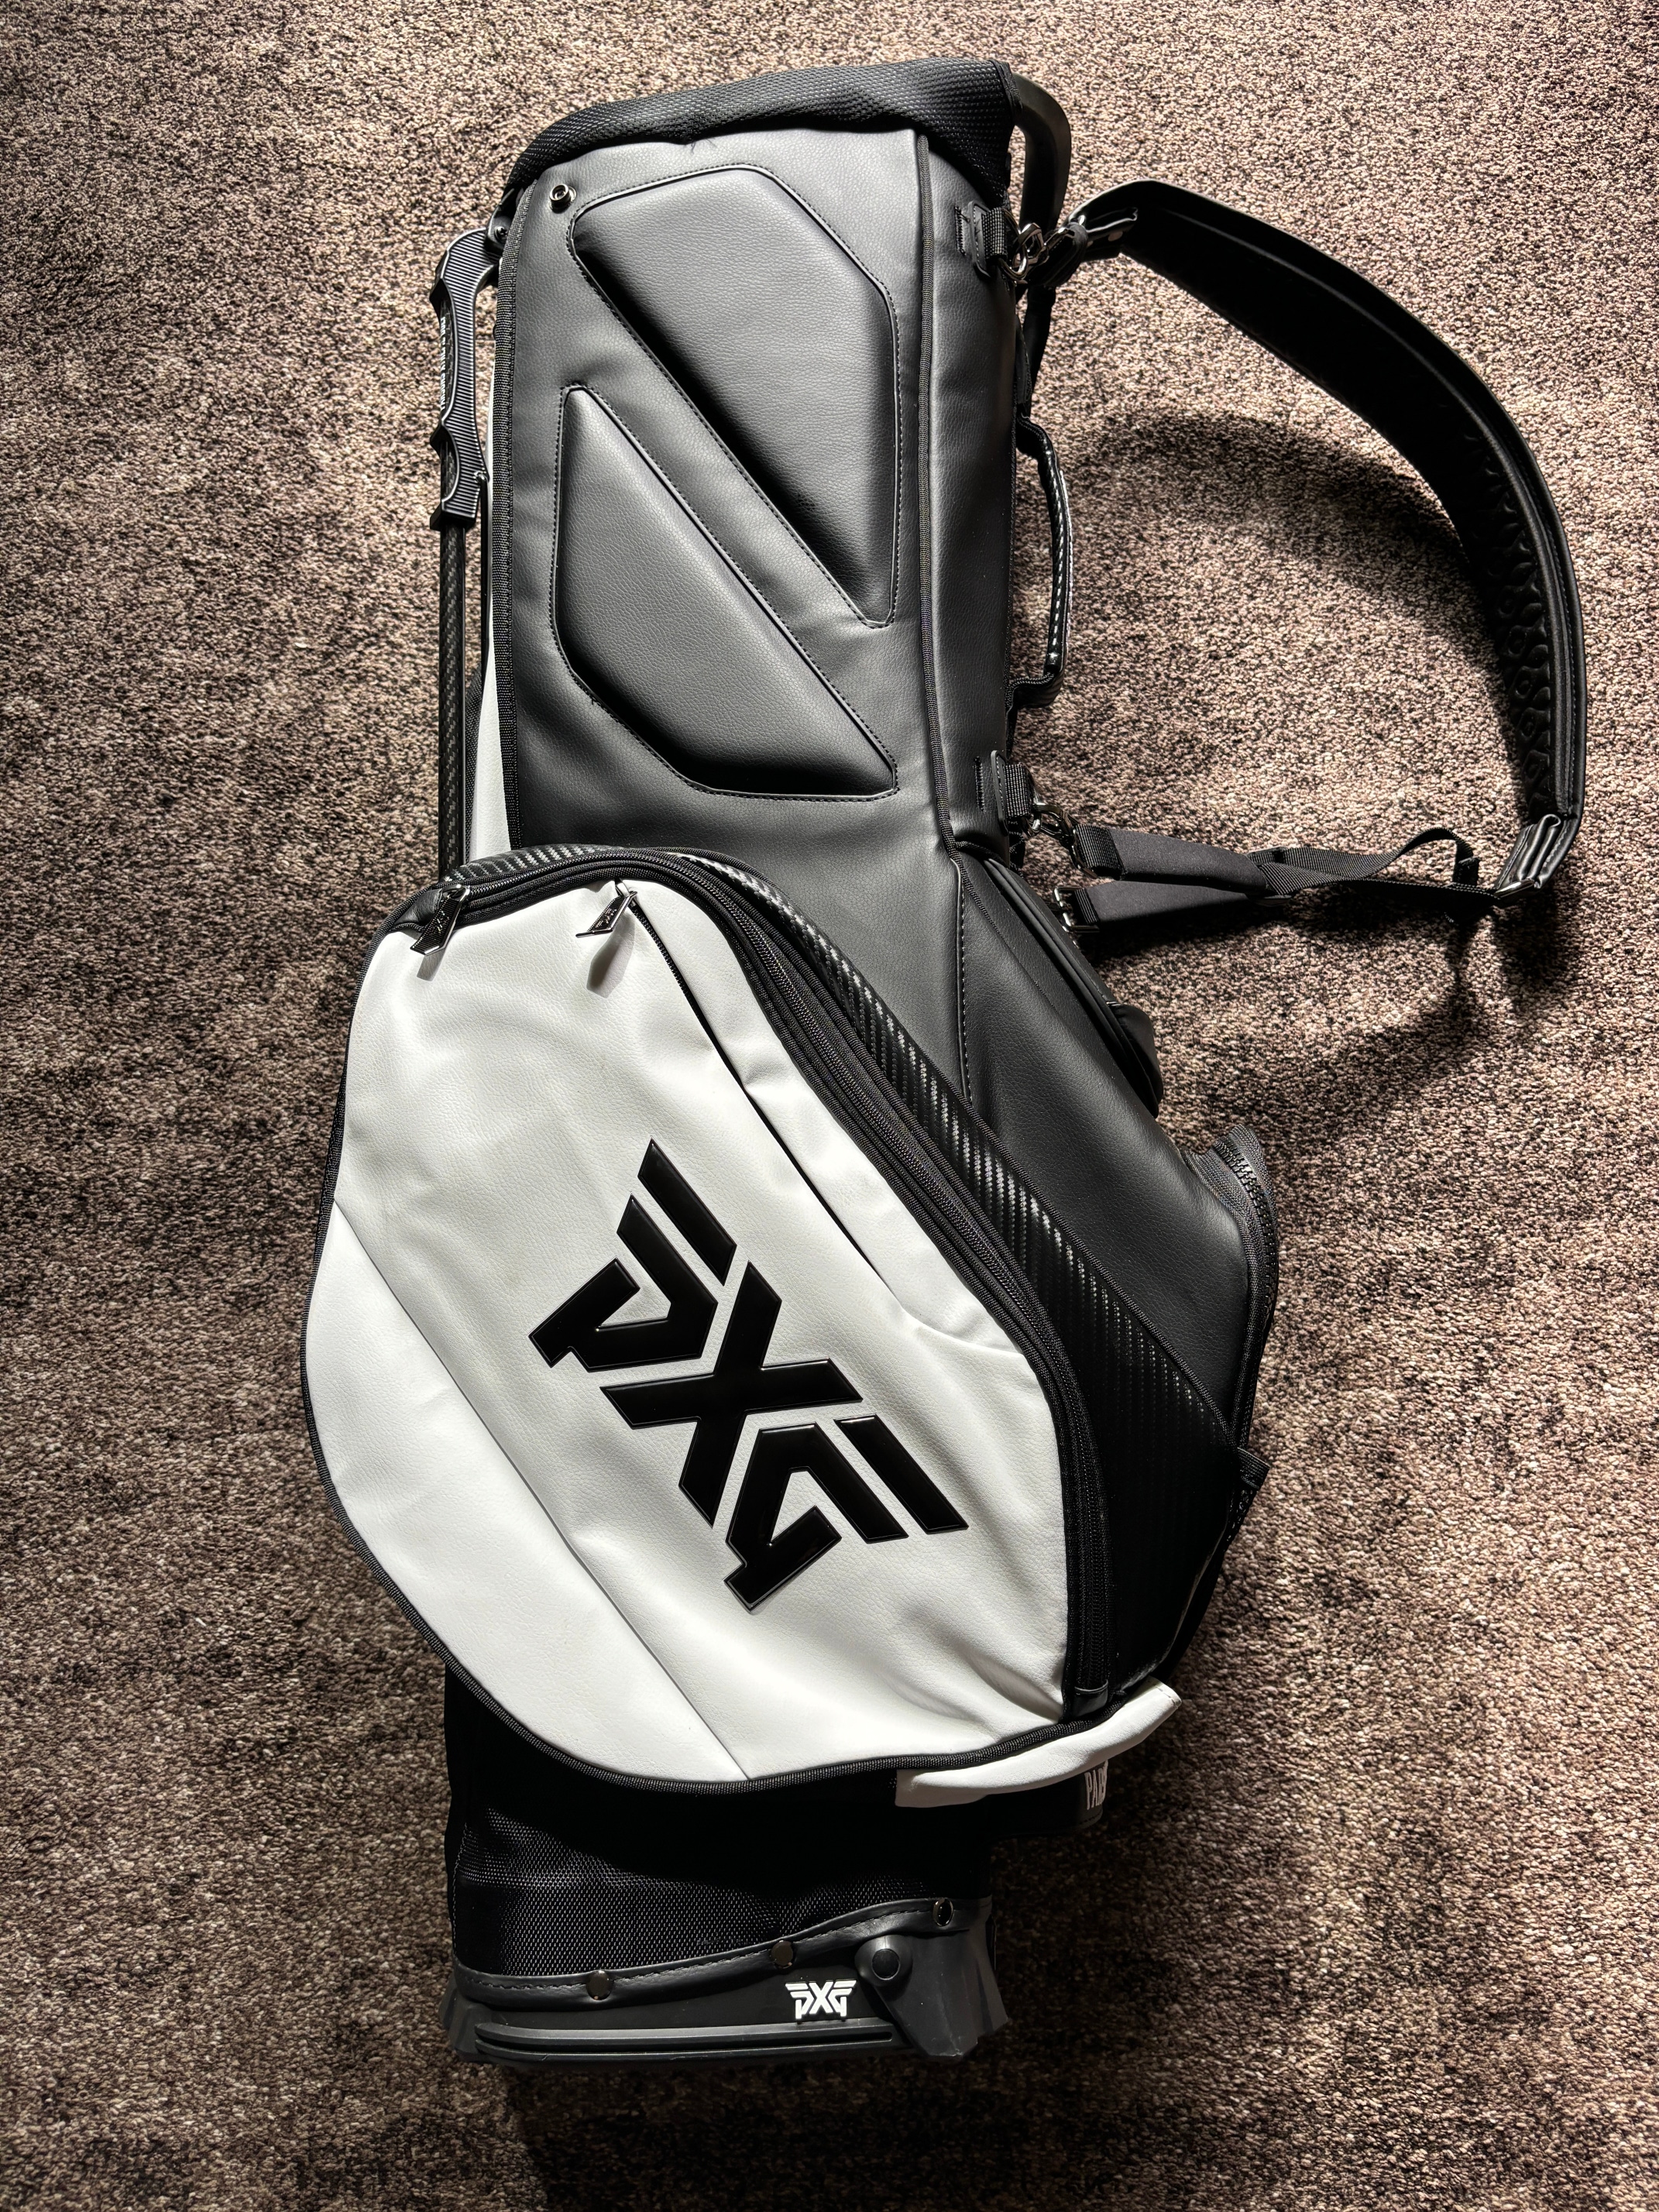 Used Unisex PXG Bag - Black and White - Six-way top -  MINT CONDITION!